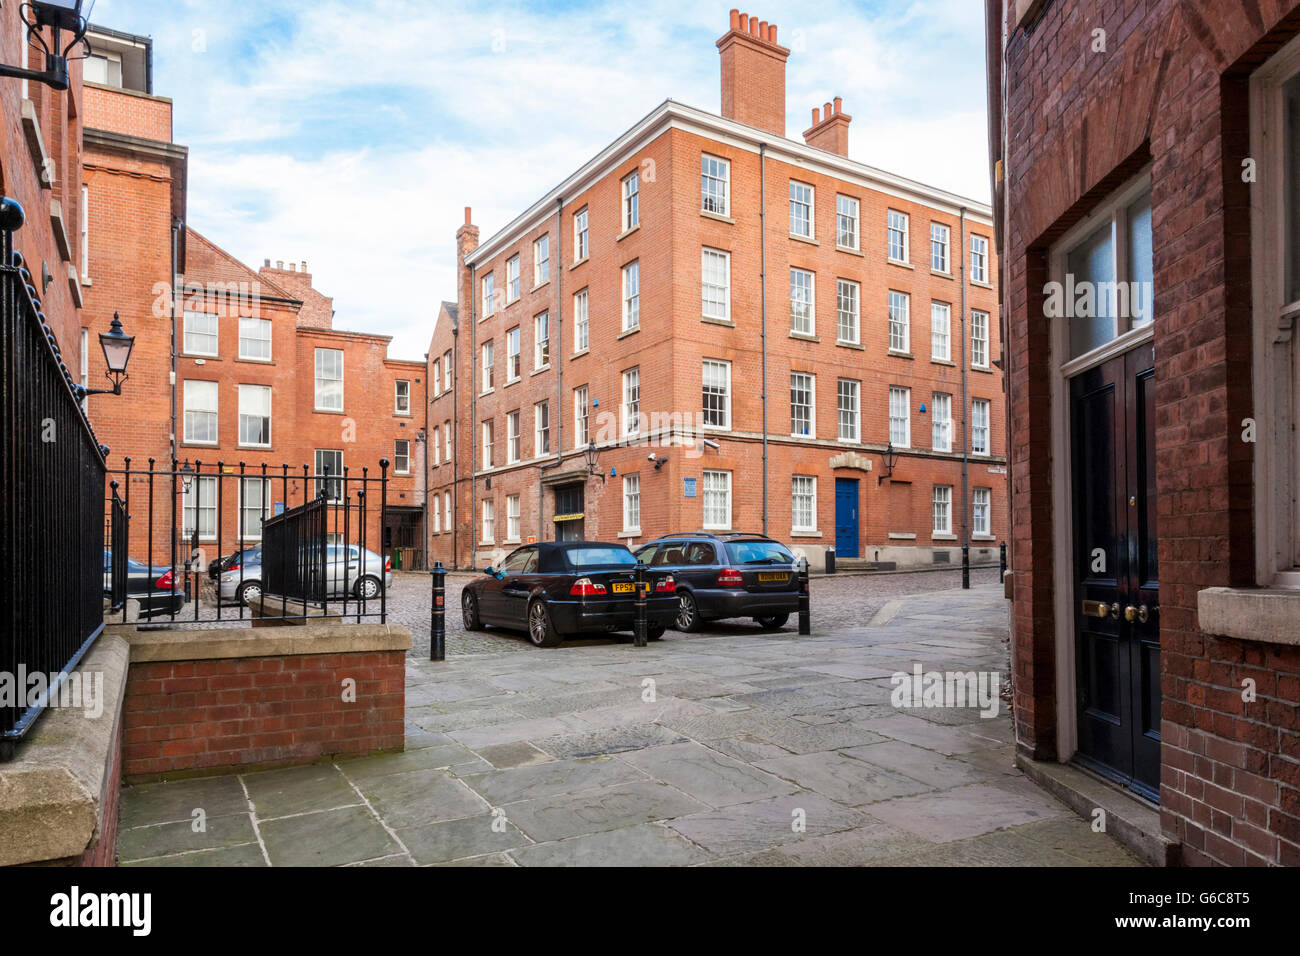 18th century Georgian warehouses. These buildings were redeveloped for residential and commercial use. Commerce Square, Lace Market, Nottingham, UK Stock Photo